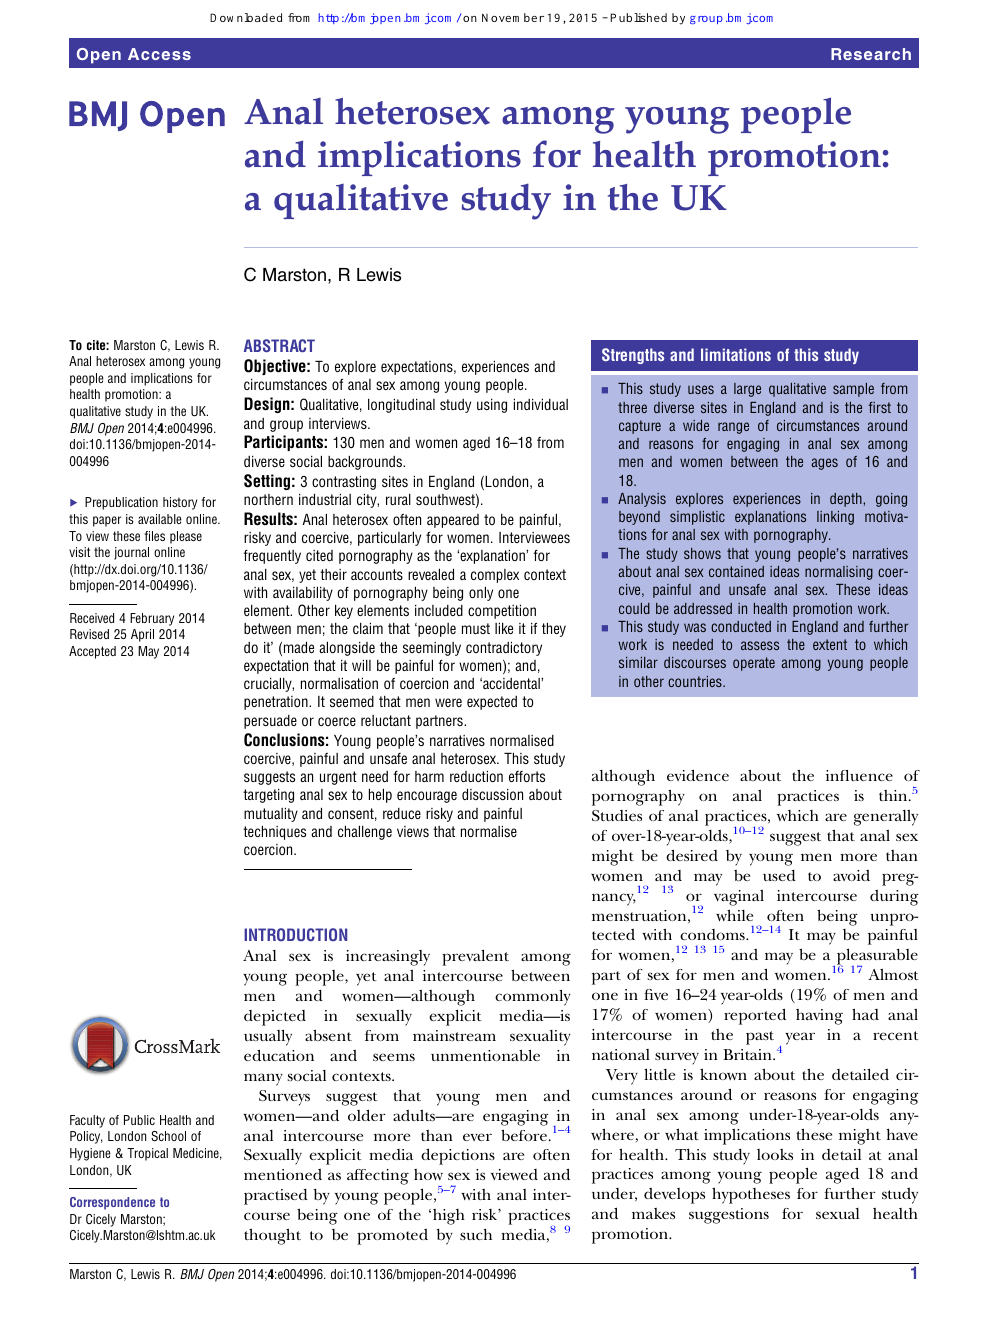 Anal heterosex among young people and implications for health promotion a qualitative study in the UK picture